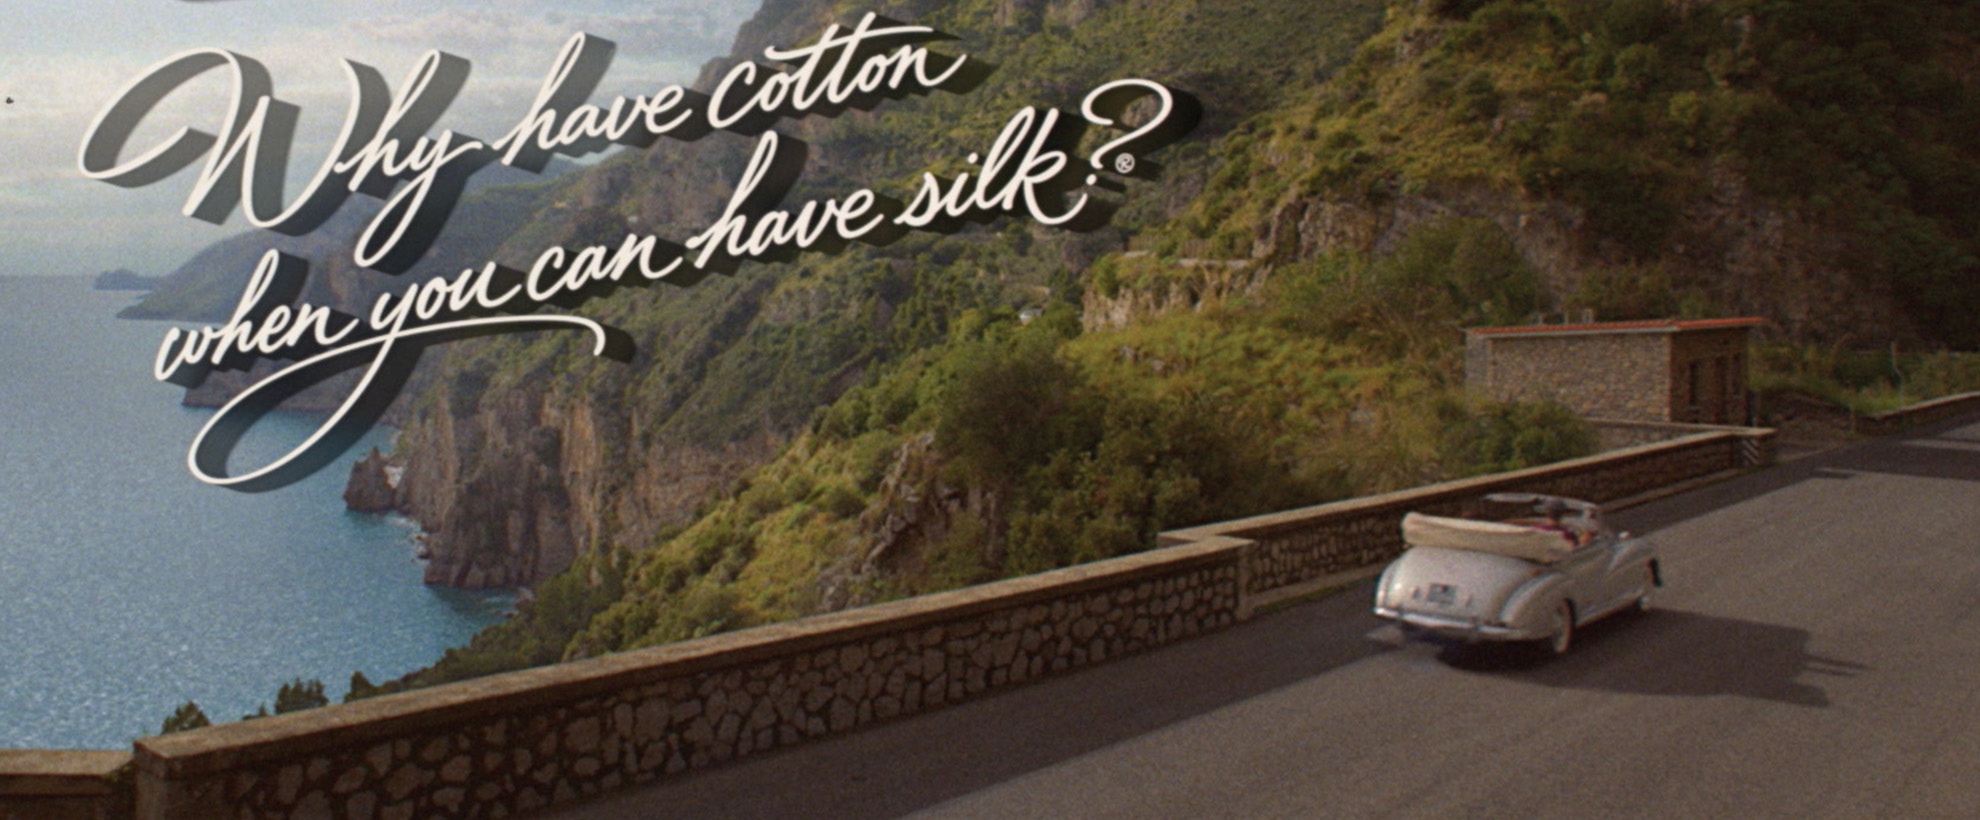 The phrase 'Why have cotton when you can have silk' is written across a shot of the Italian coast with a vintage convertible car overlooking the view